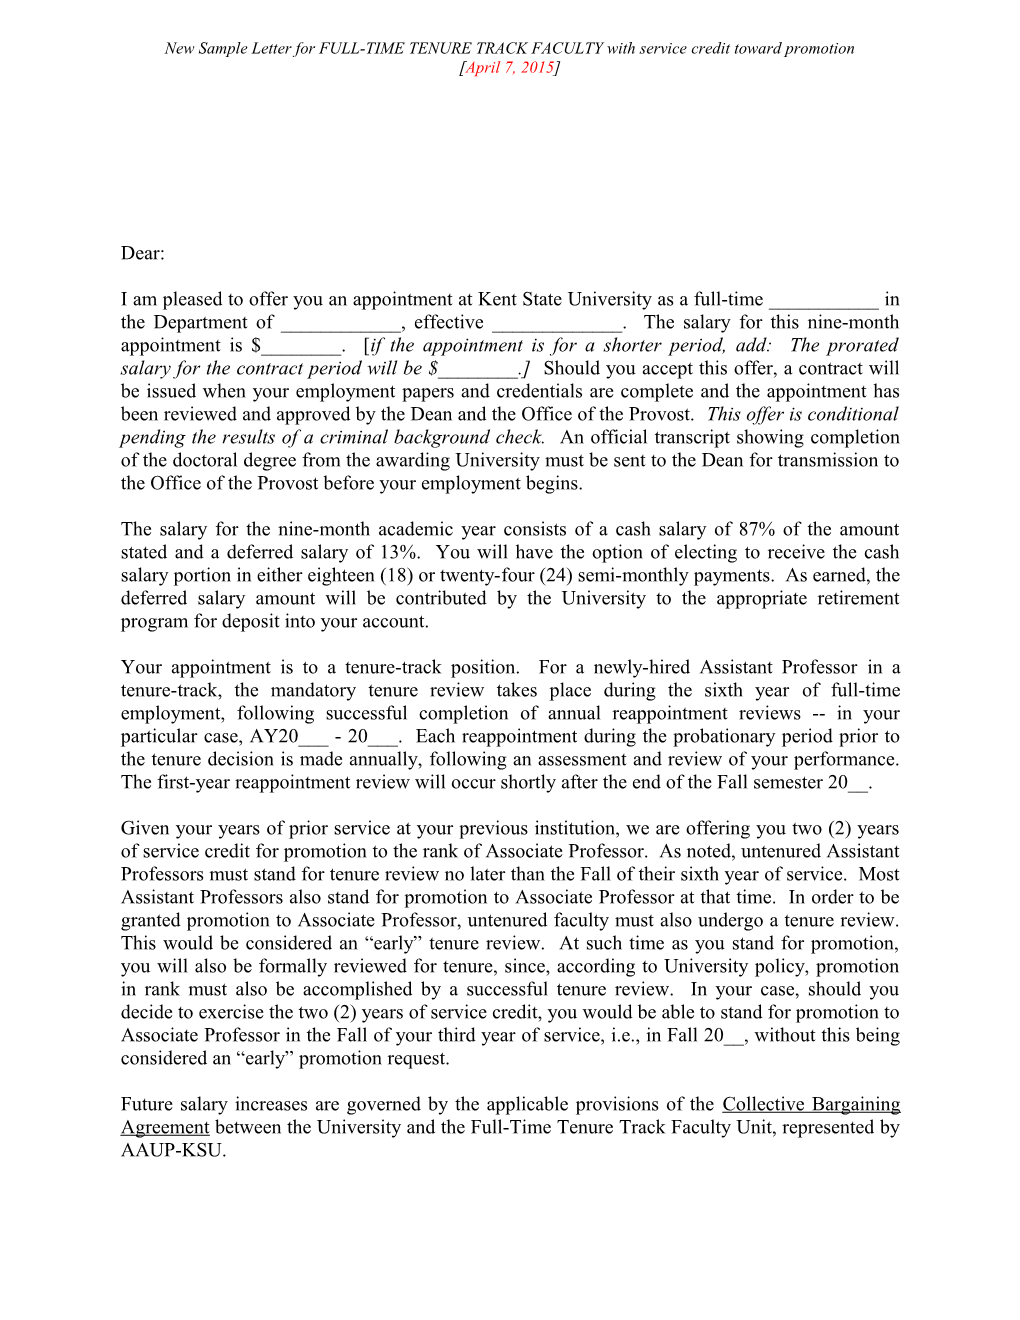 Sample Letter for FULL-TIME TENURE TRACK FACULTY Positions